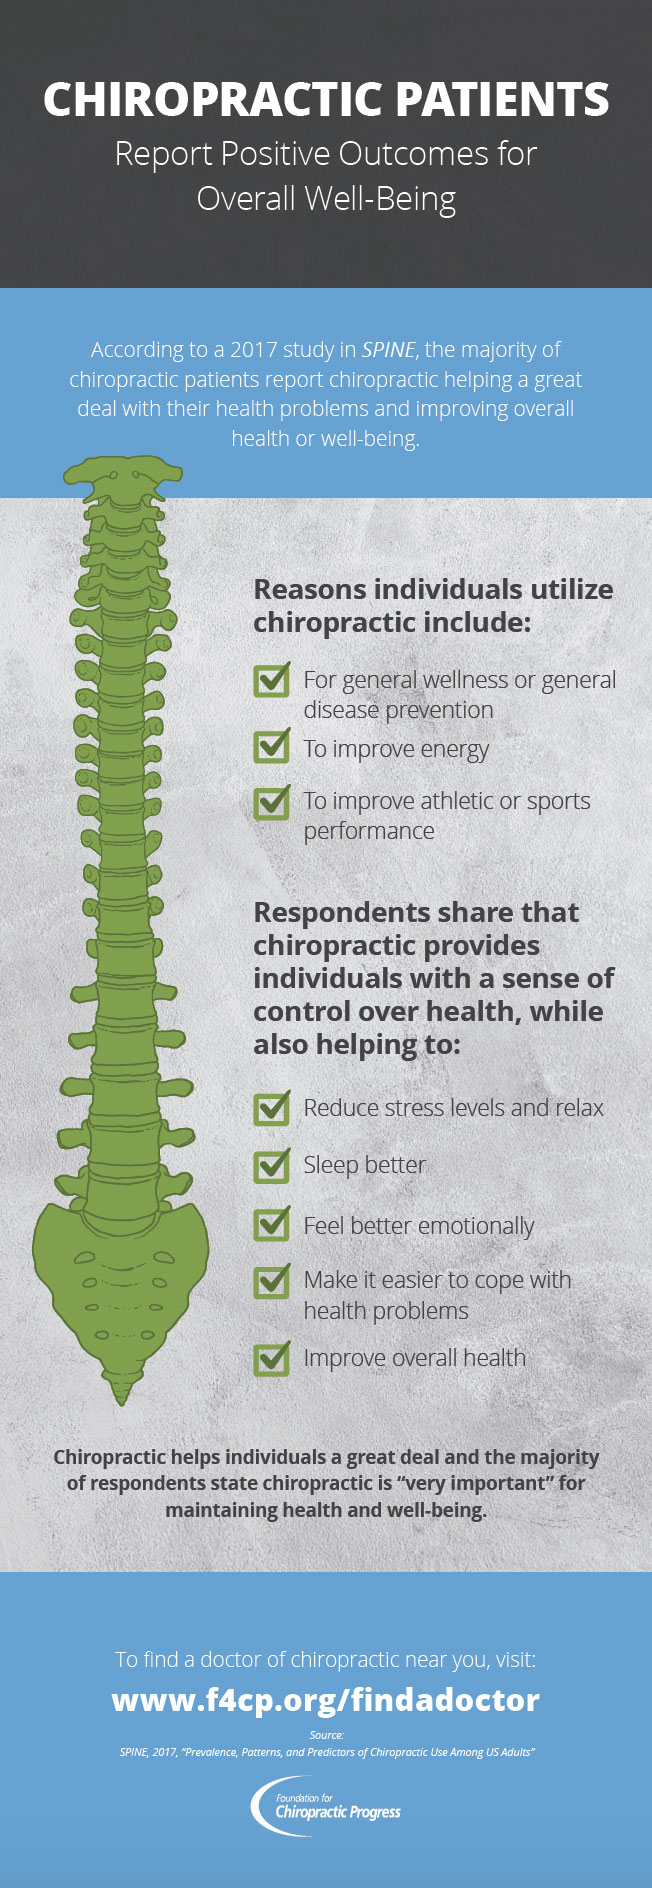 Chiropractic patients report positive outcomes for overall health and well-being.